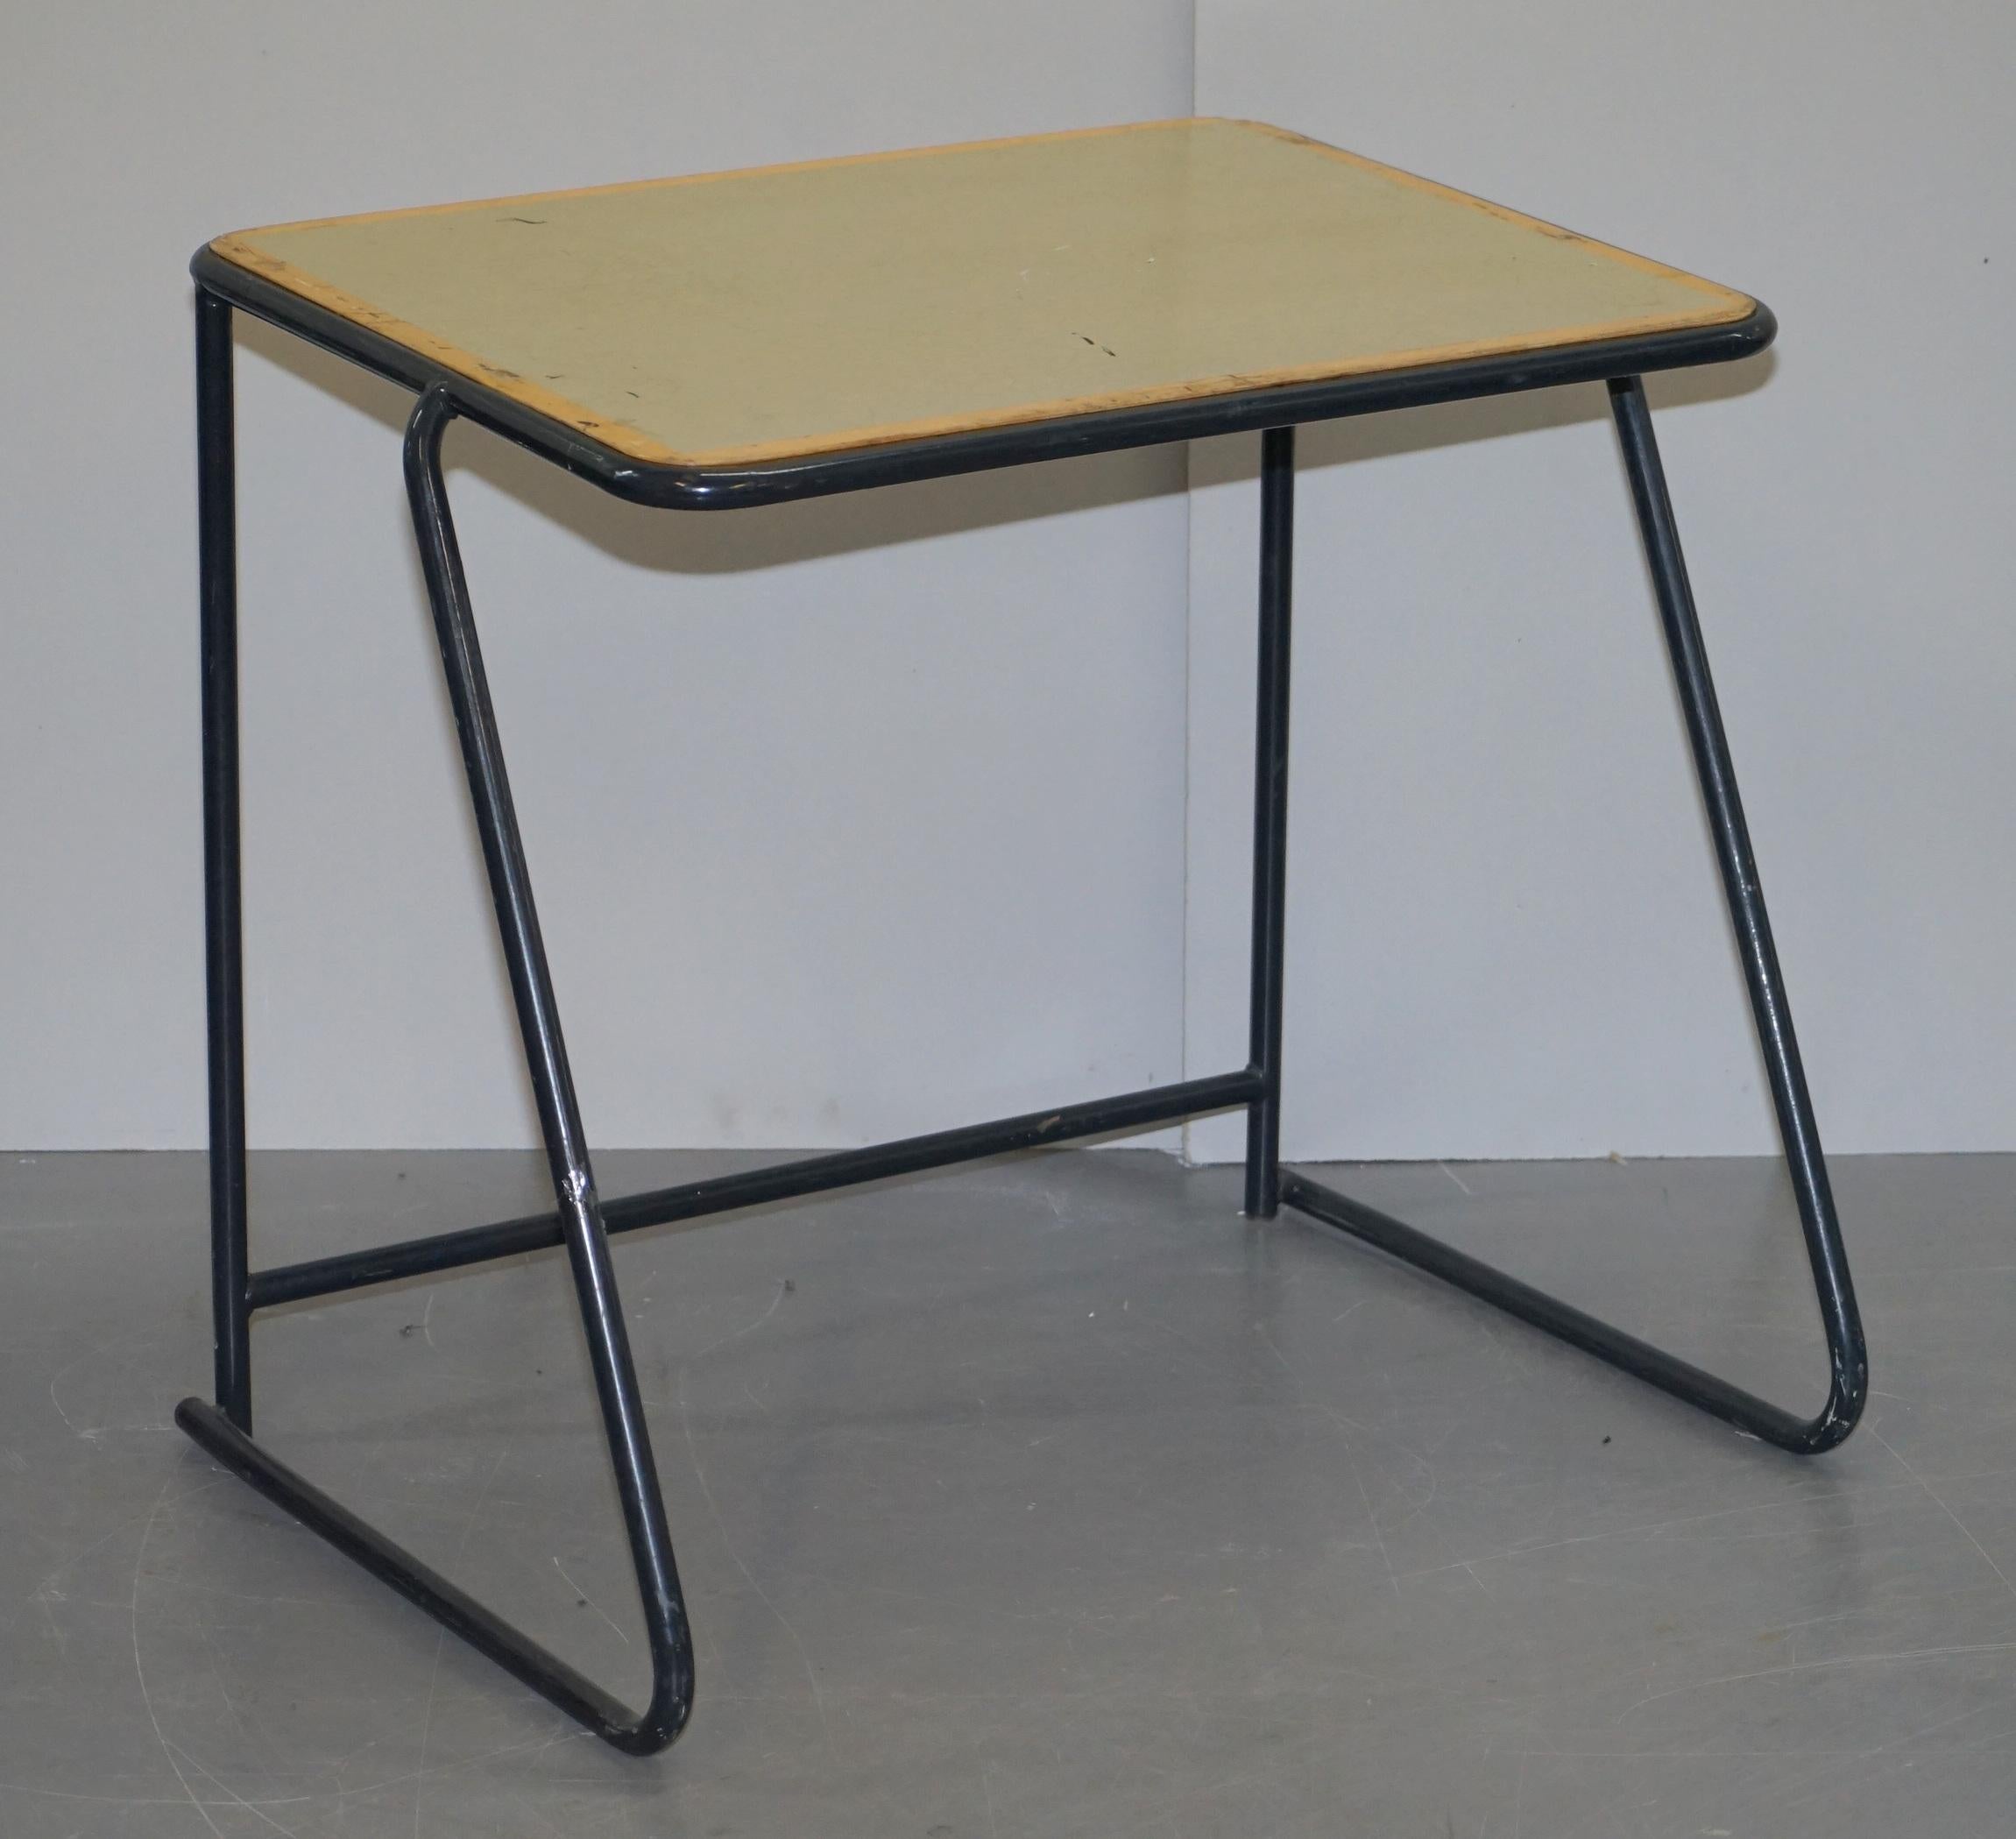 We are delighted to offer for sale 1 of 20 British military Army stacking desk tables

A well made suite, this listing is to buy one with the option to buy up to twenty

They are original patina so have various marks, signs of use and so on all